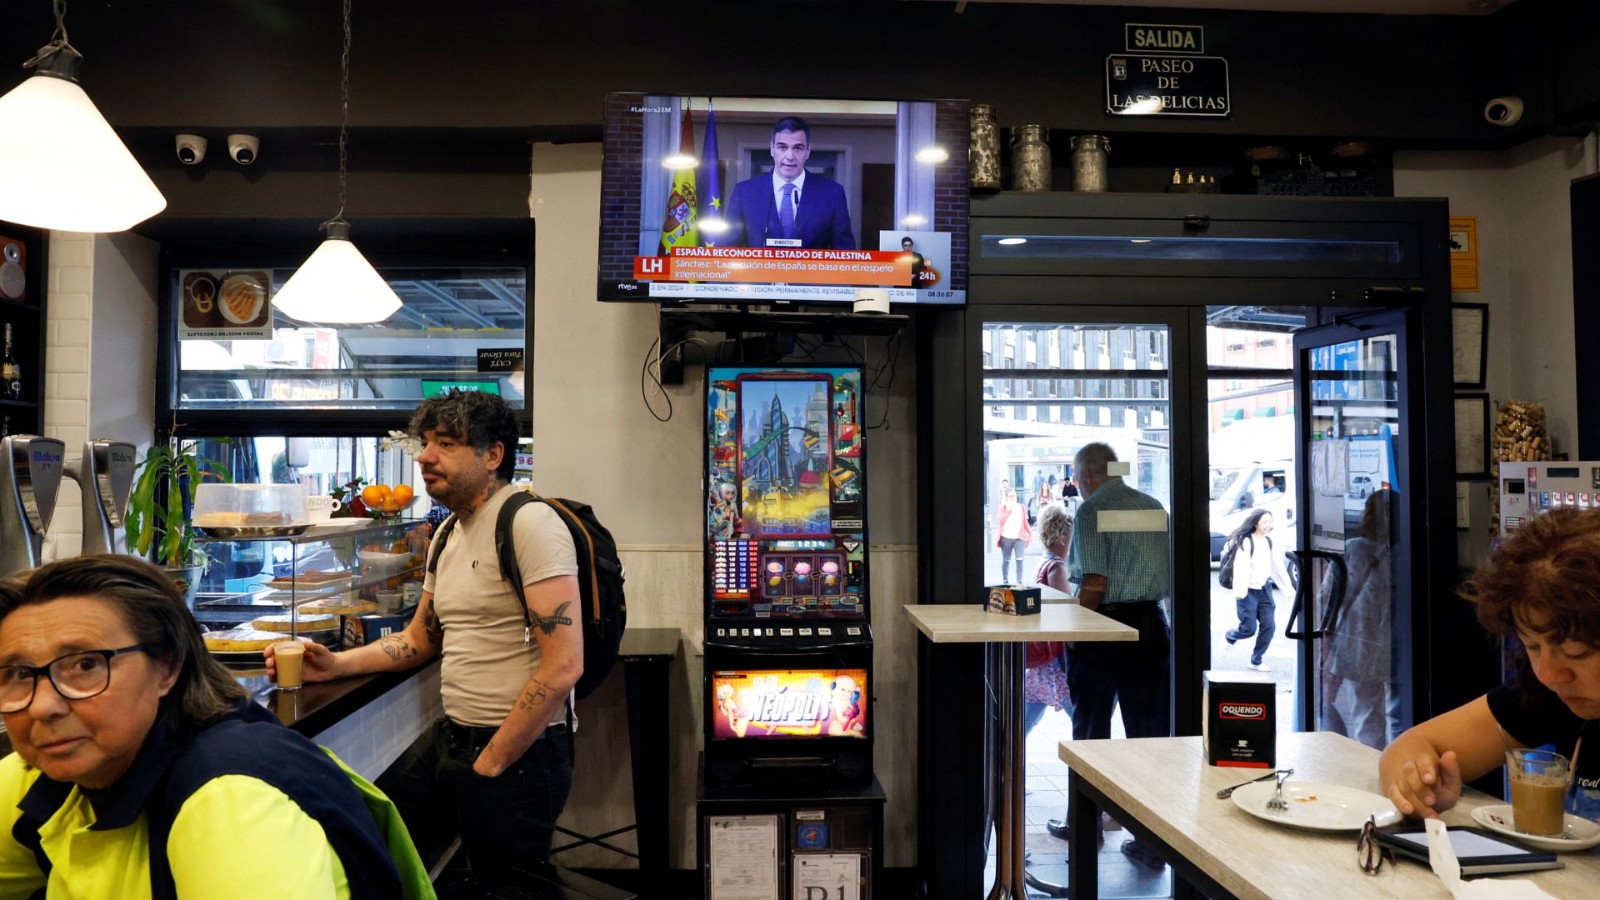 Customers have breakfast as Spain's Prime Minister Pedro Sanchez is seen on a screen at the start of a live news TV broadcast announcing Spain's recognition of the Palestinian state, in a bar in Madrid. /Susana Vera/Reuters